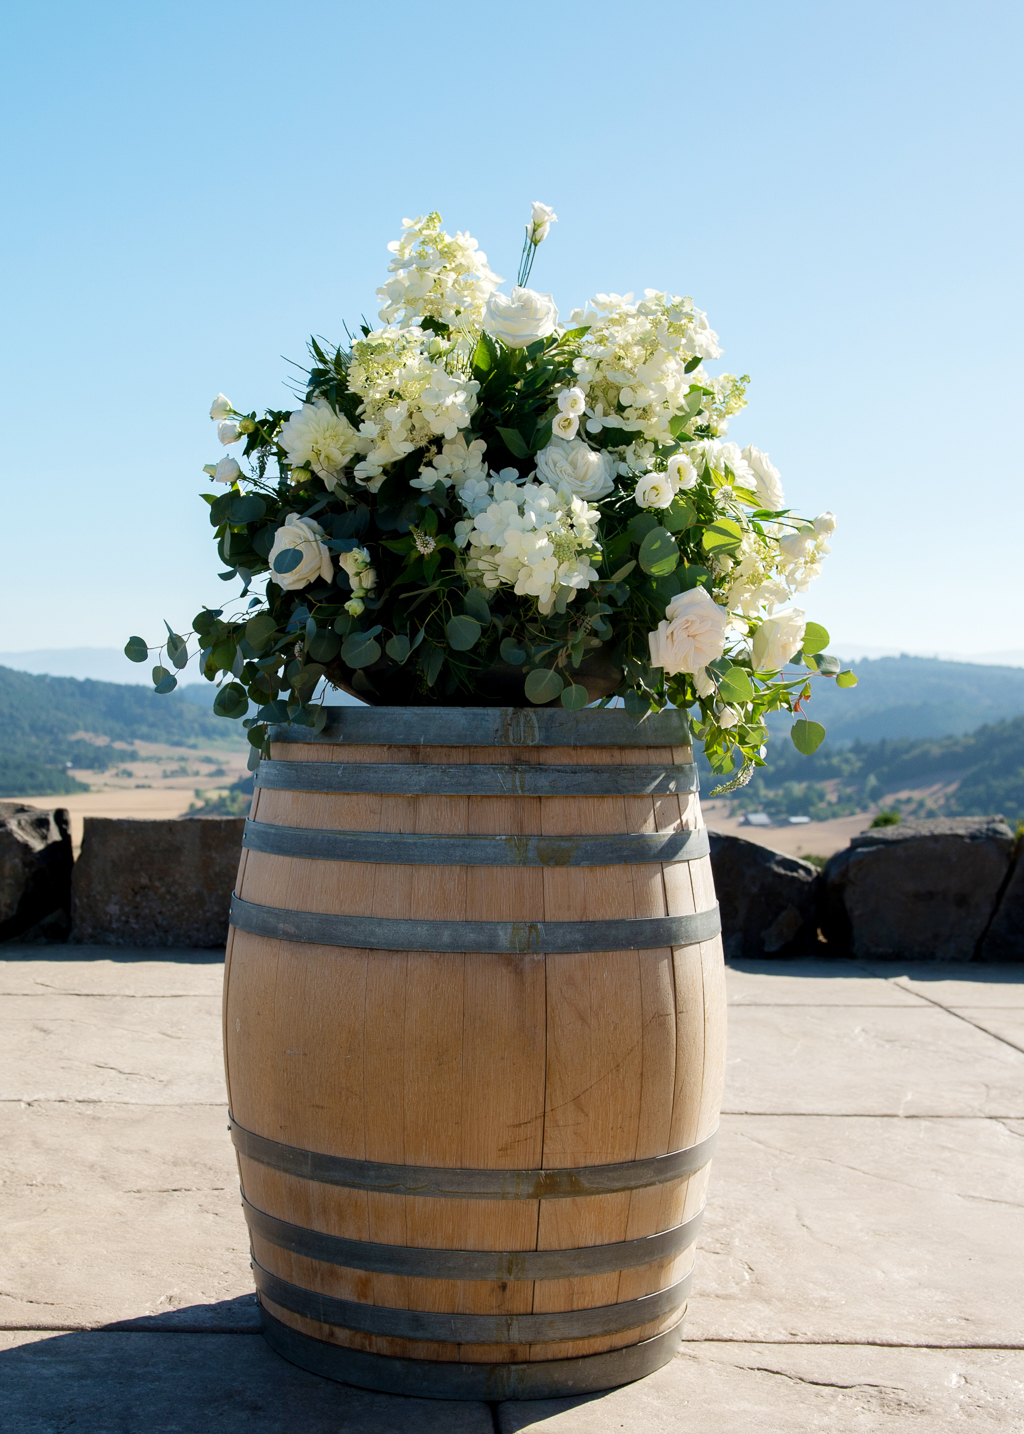 a large bouquet of ivory and white flowers sits atop a wine barrel at the front of the wedding ceremony